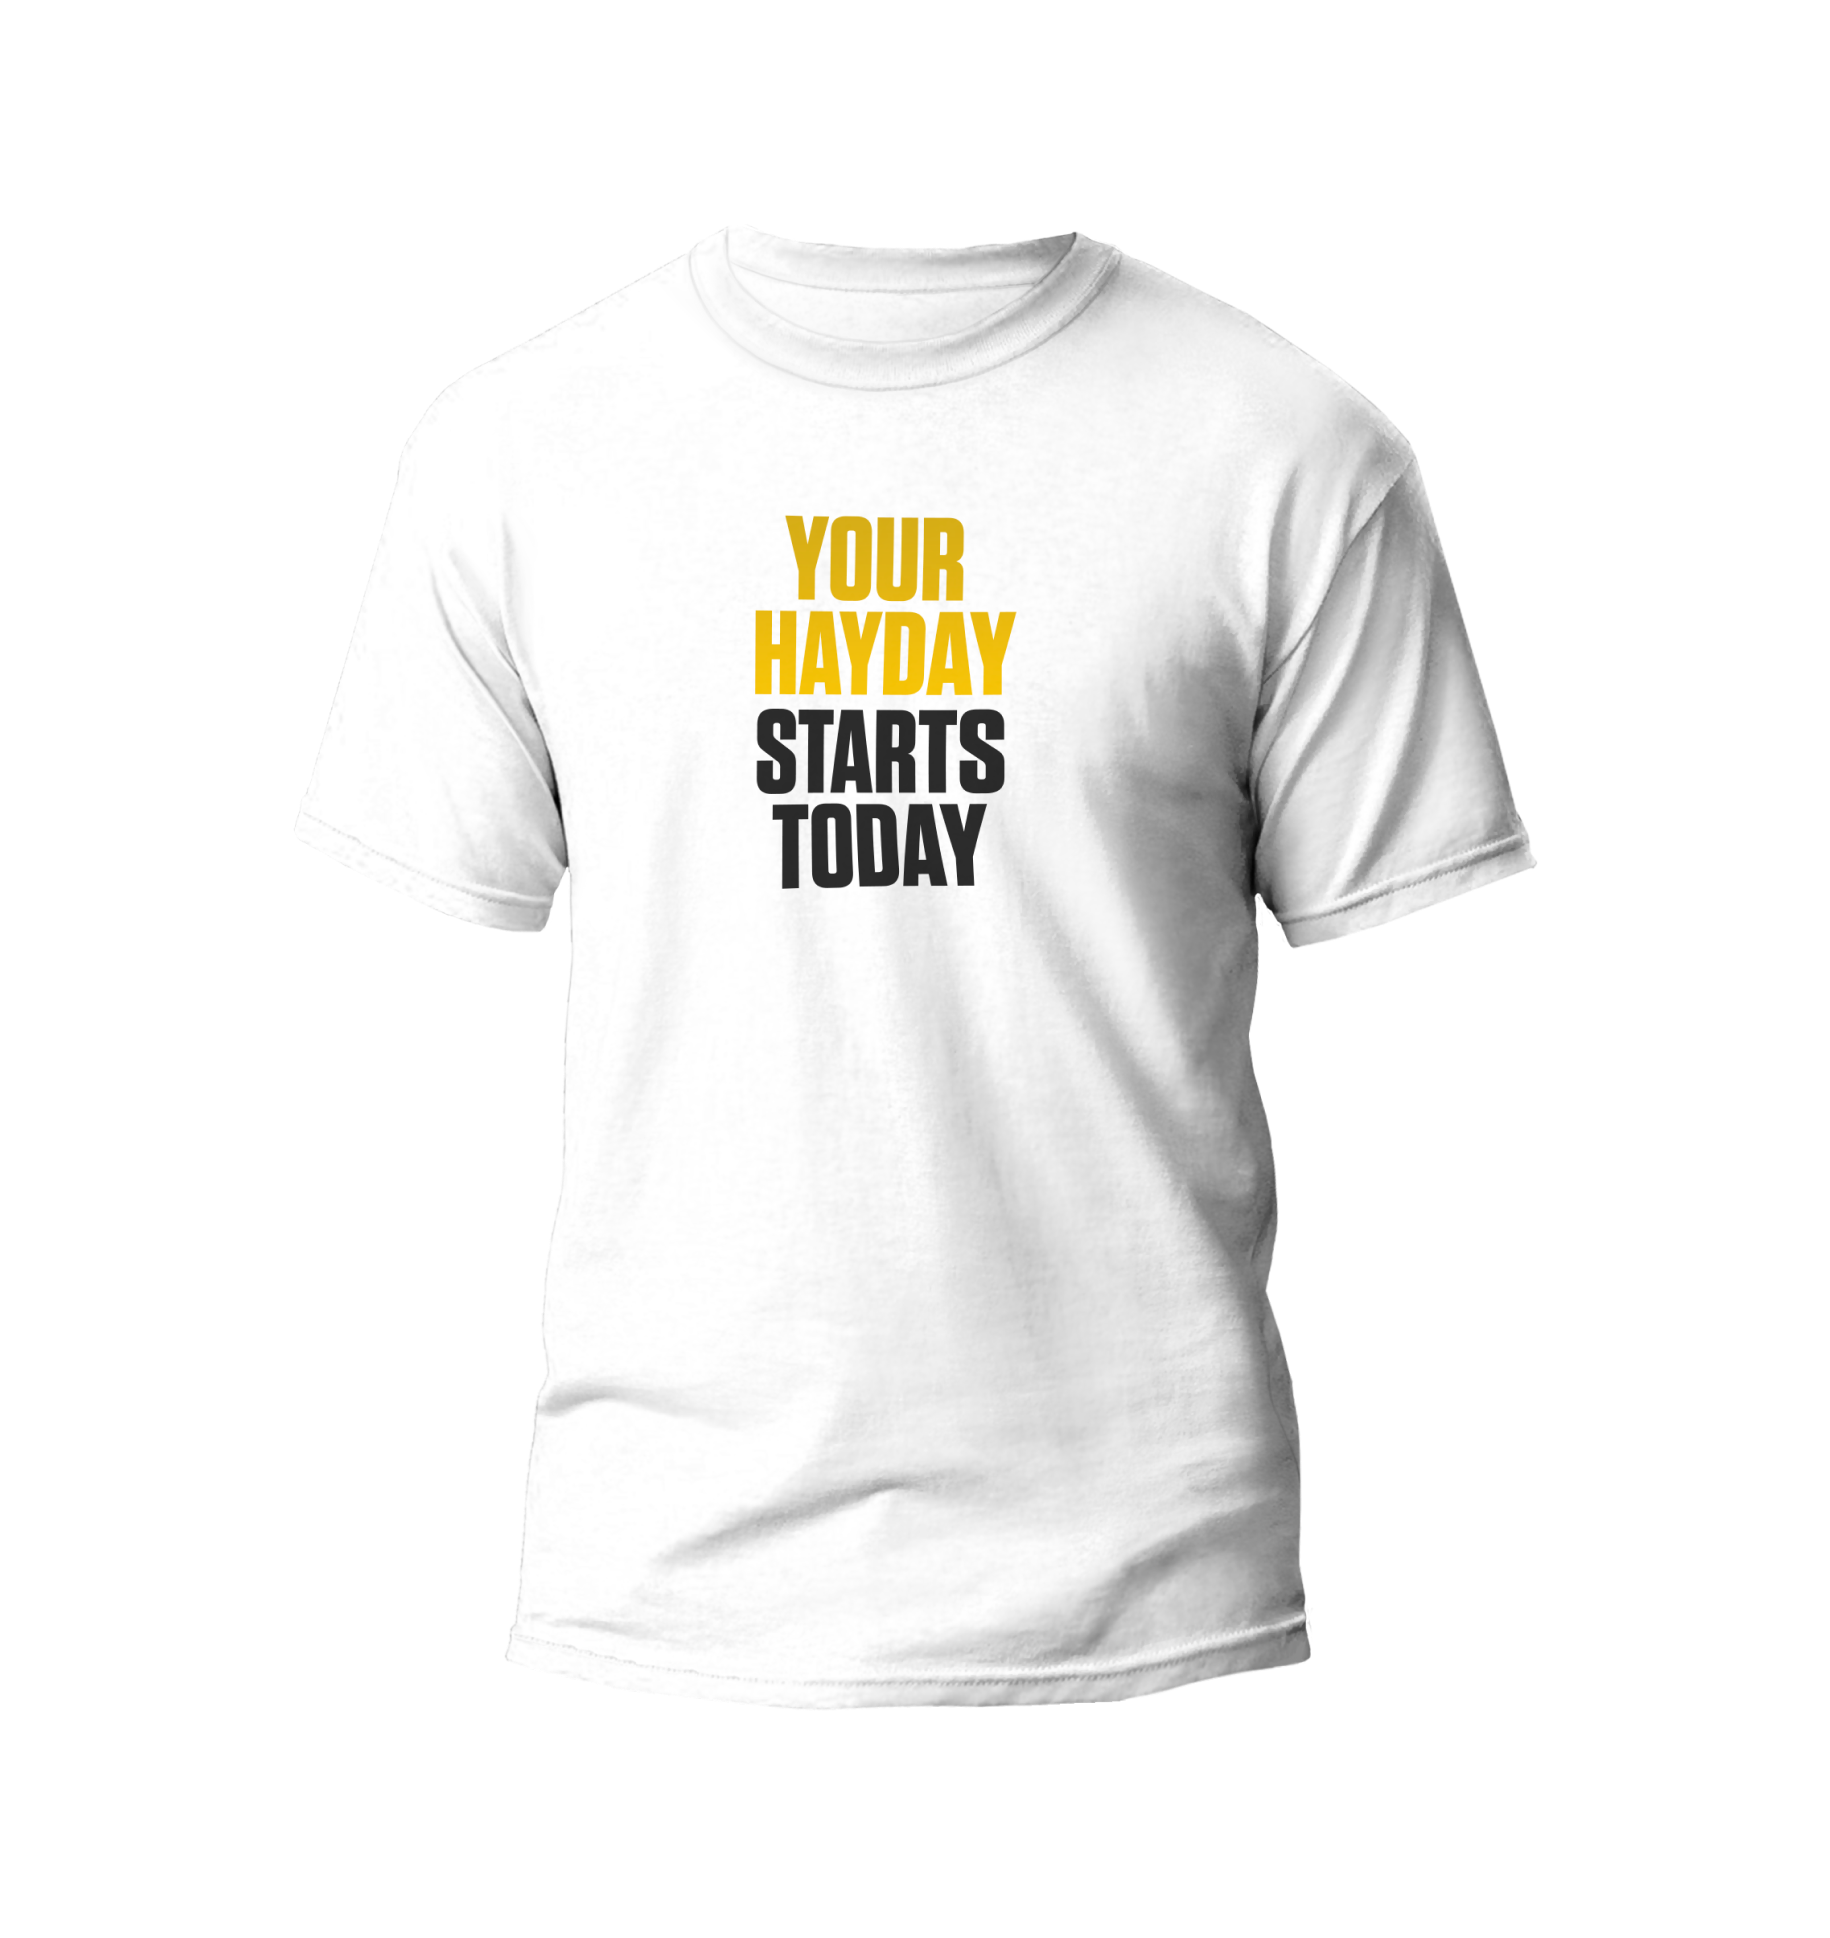 https://www.haymakercoffeeco.com/Shared/Images/Product/Your-Hayday-Starts-Today-Shirt/Group-997.png